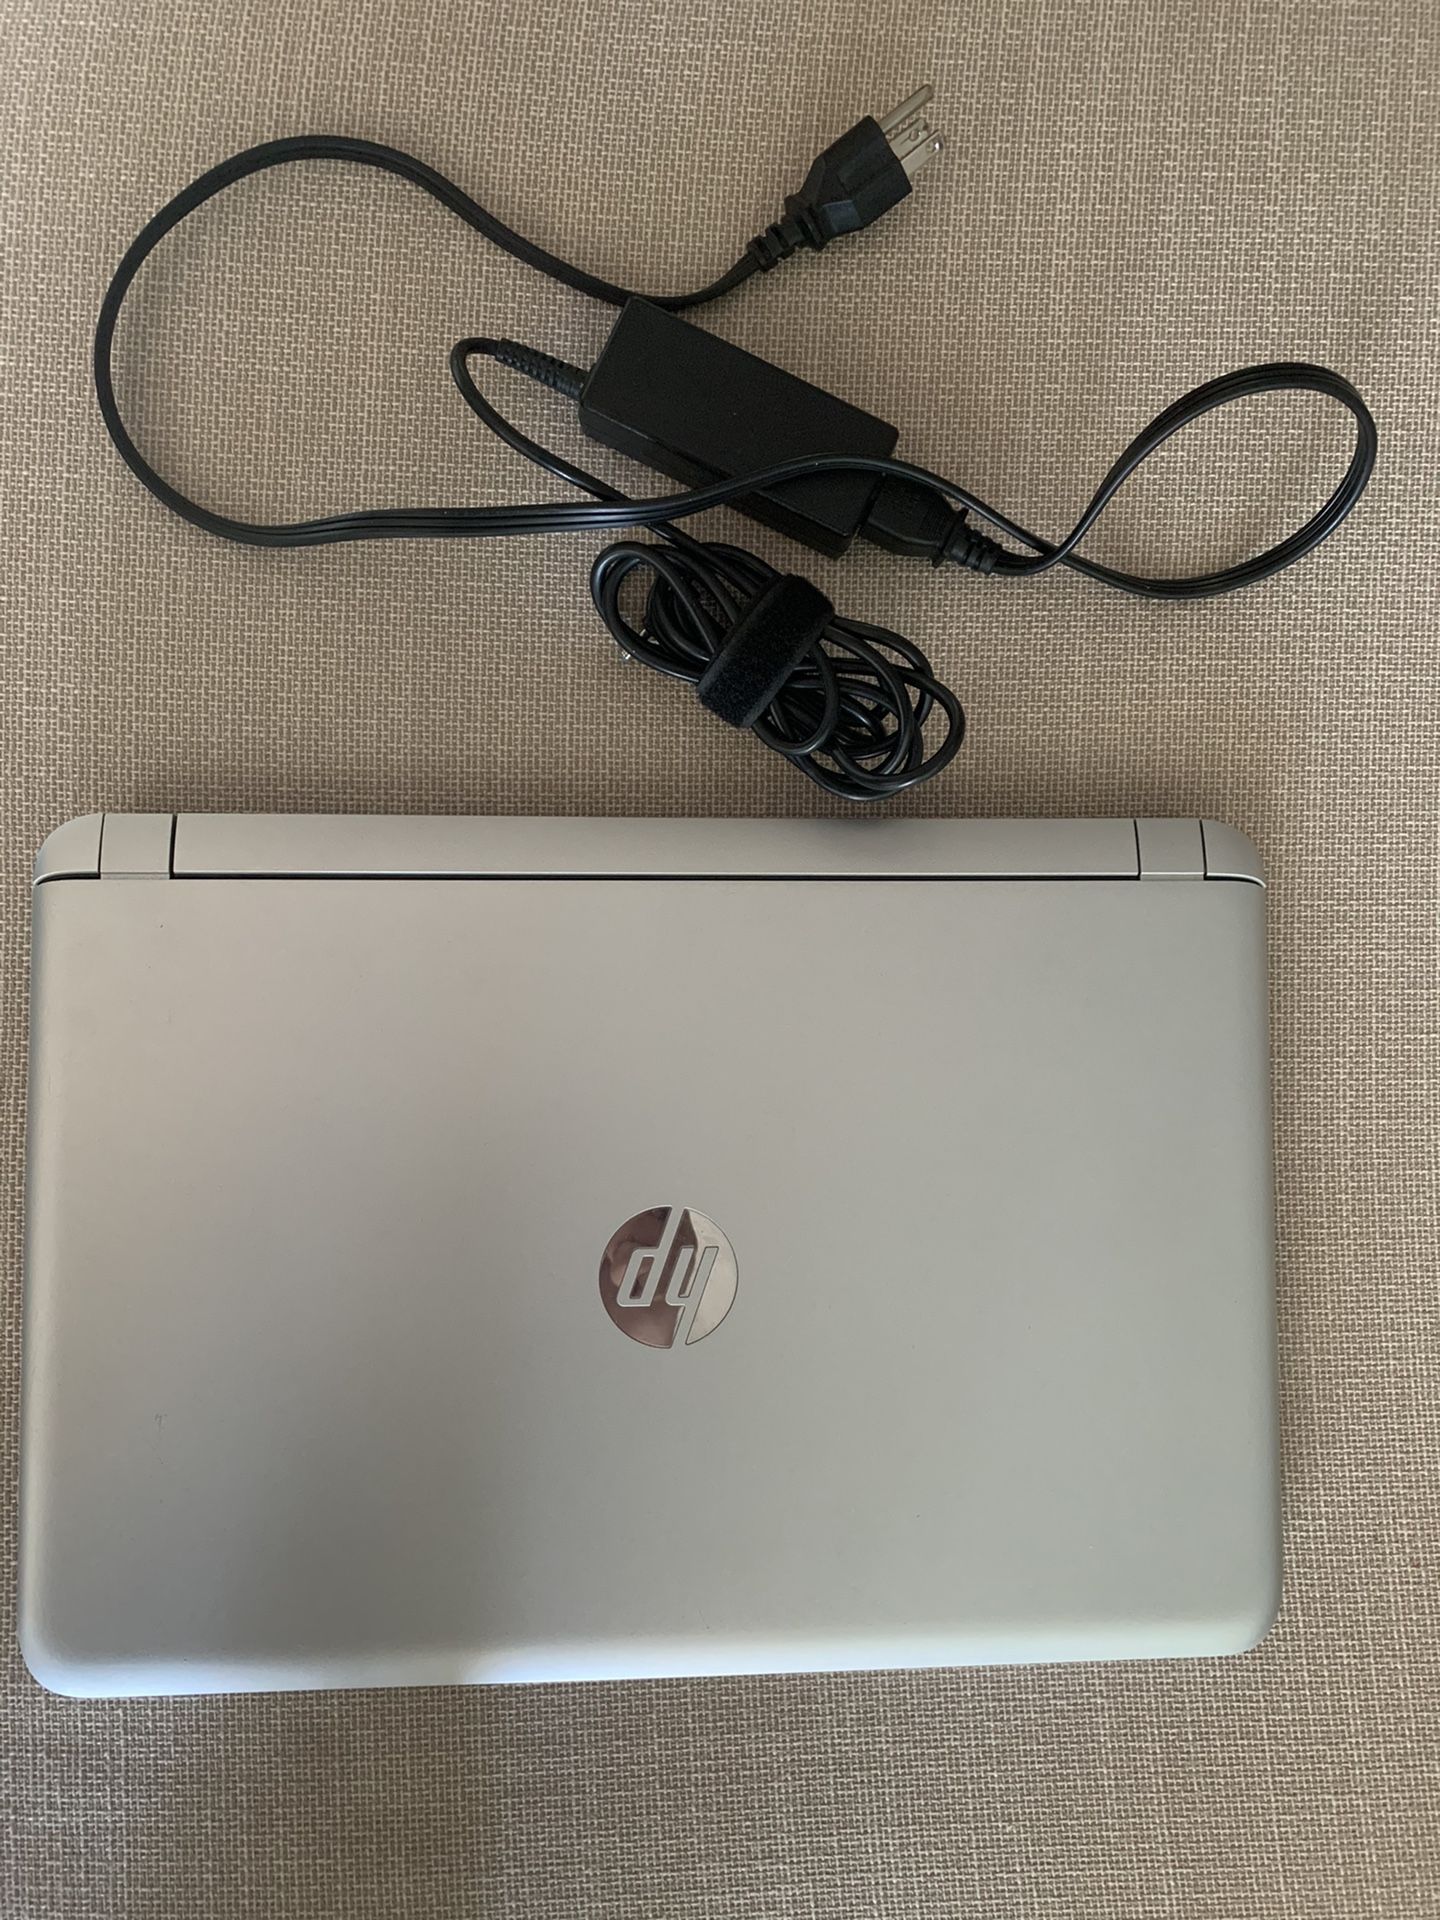 HP Pavilion Touchscreen 15.6 Inch Notebook